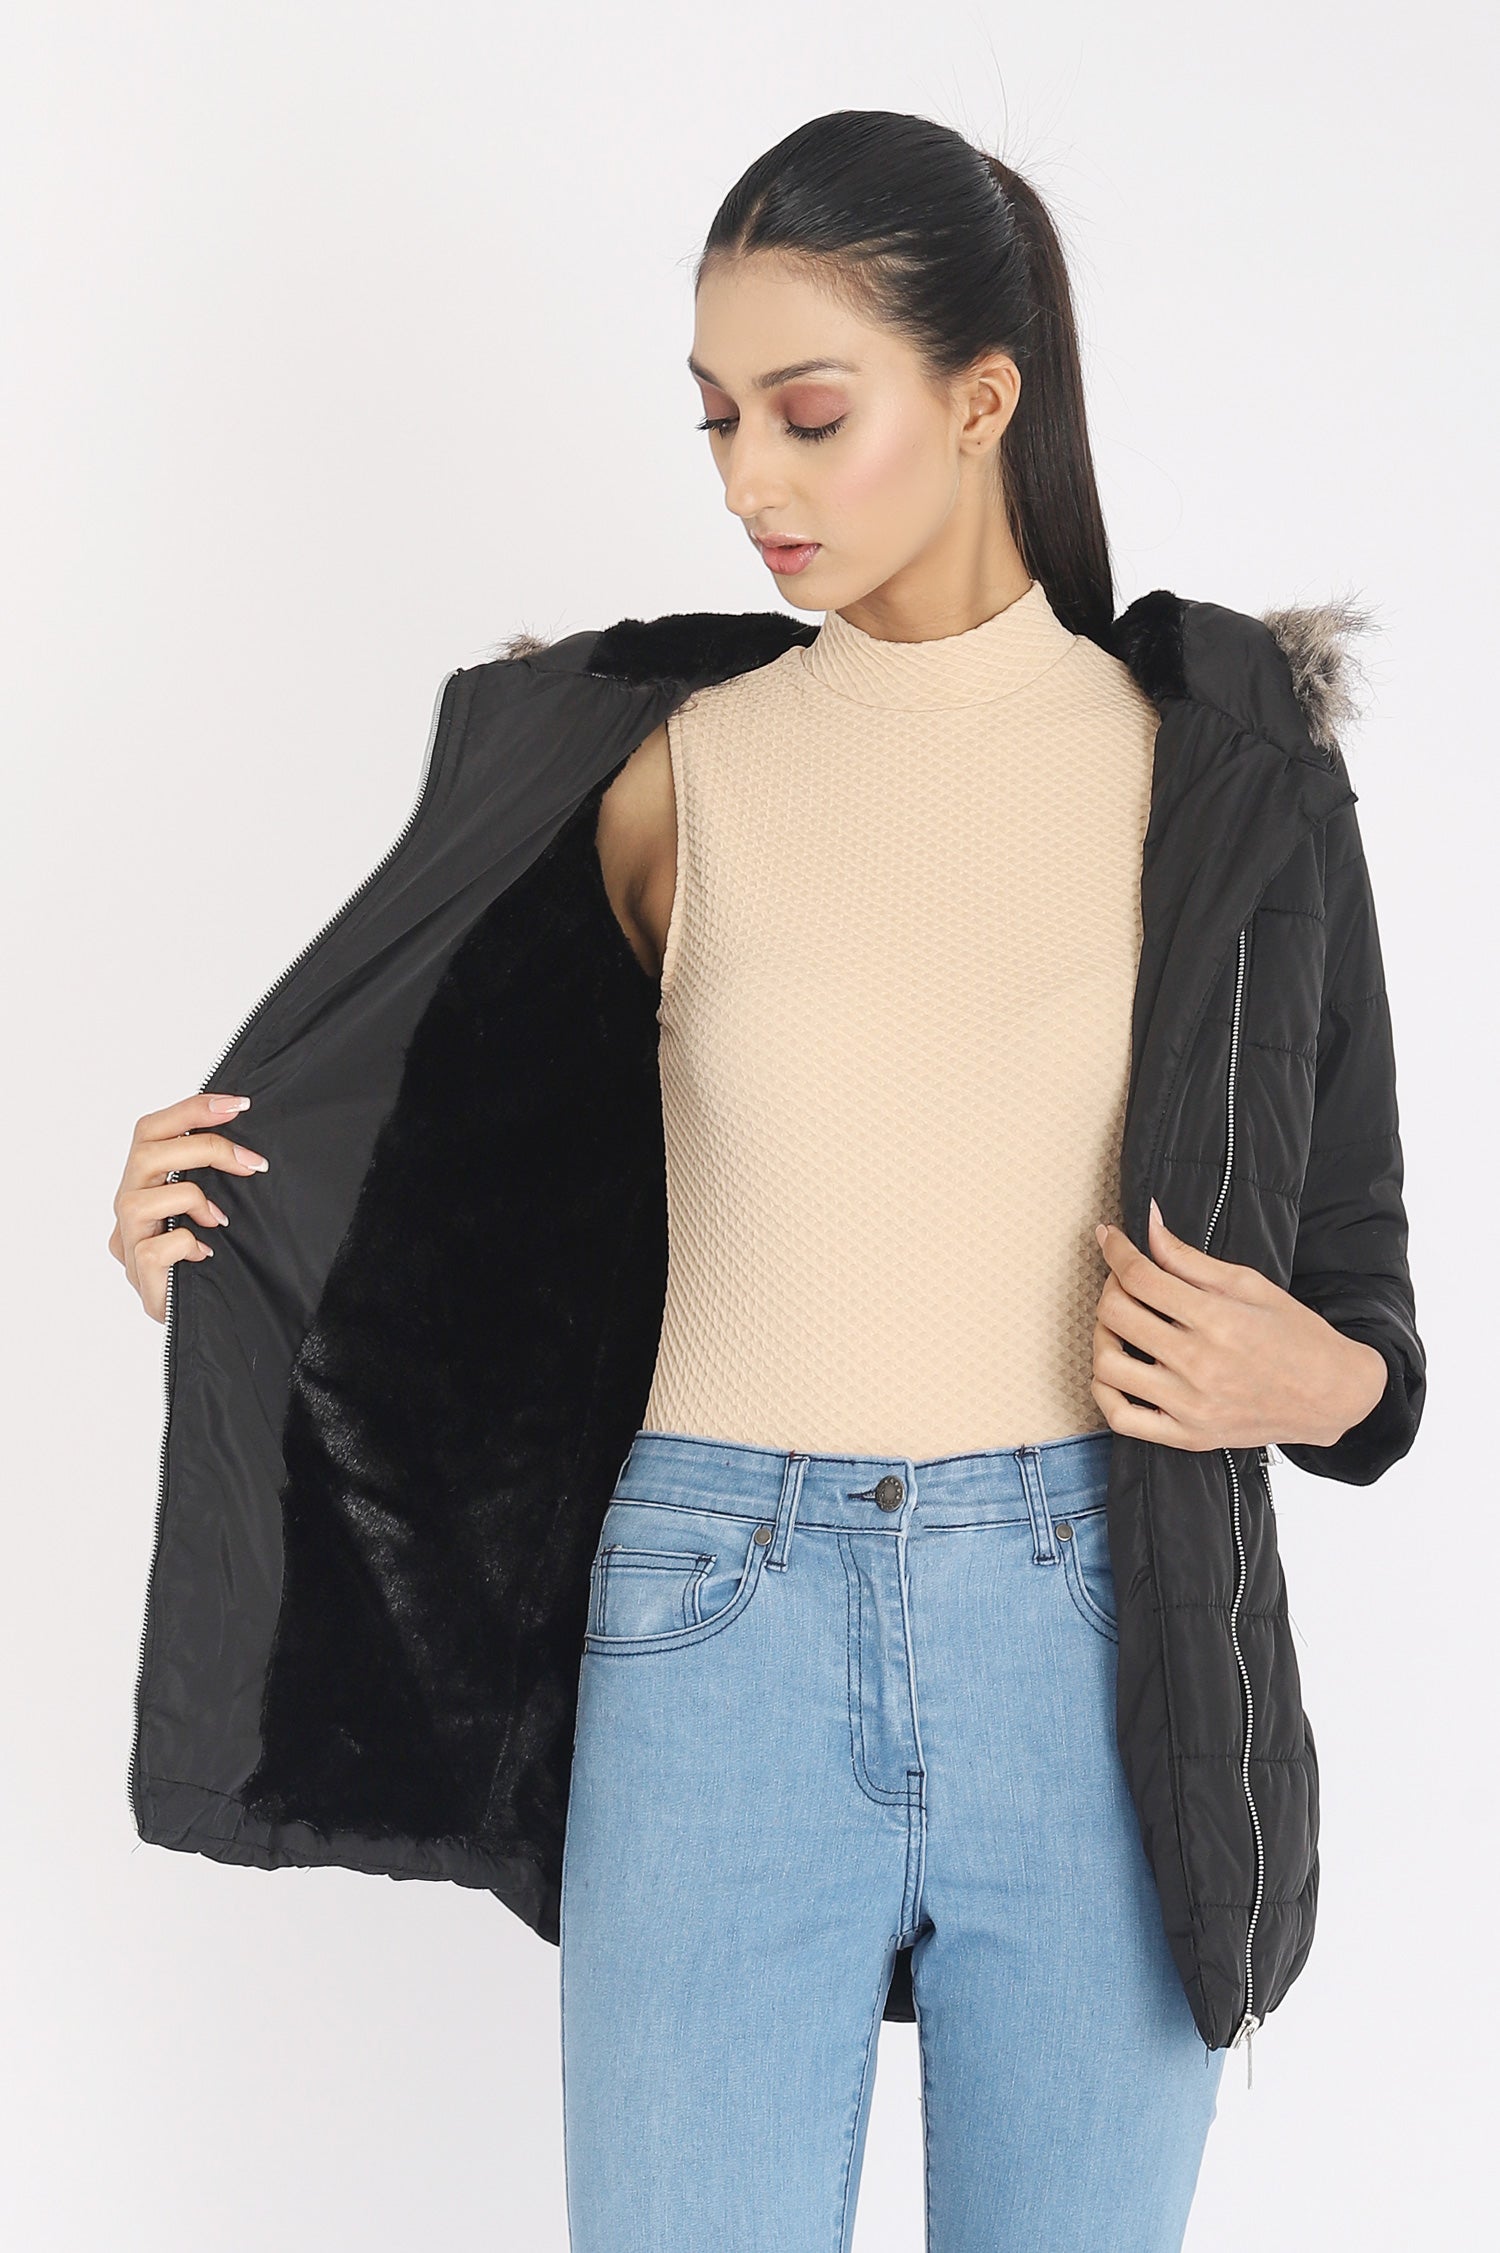 FUR QUILTED PUFFER JACKET-BLACK